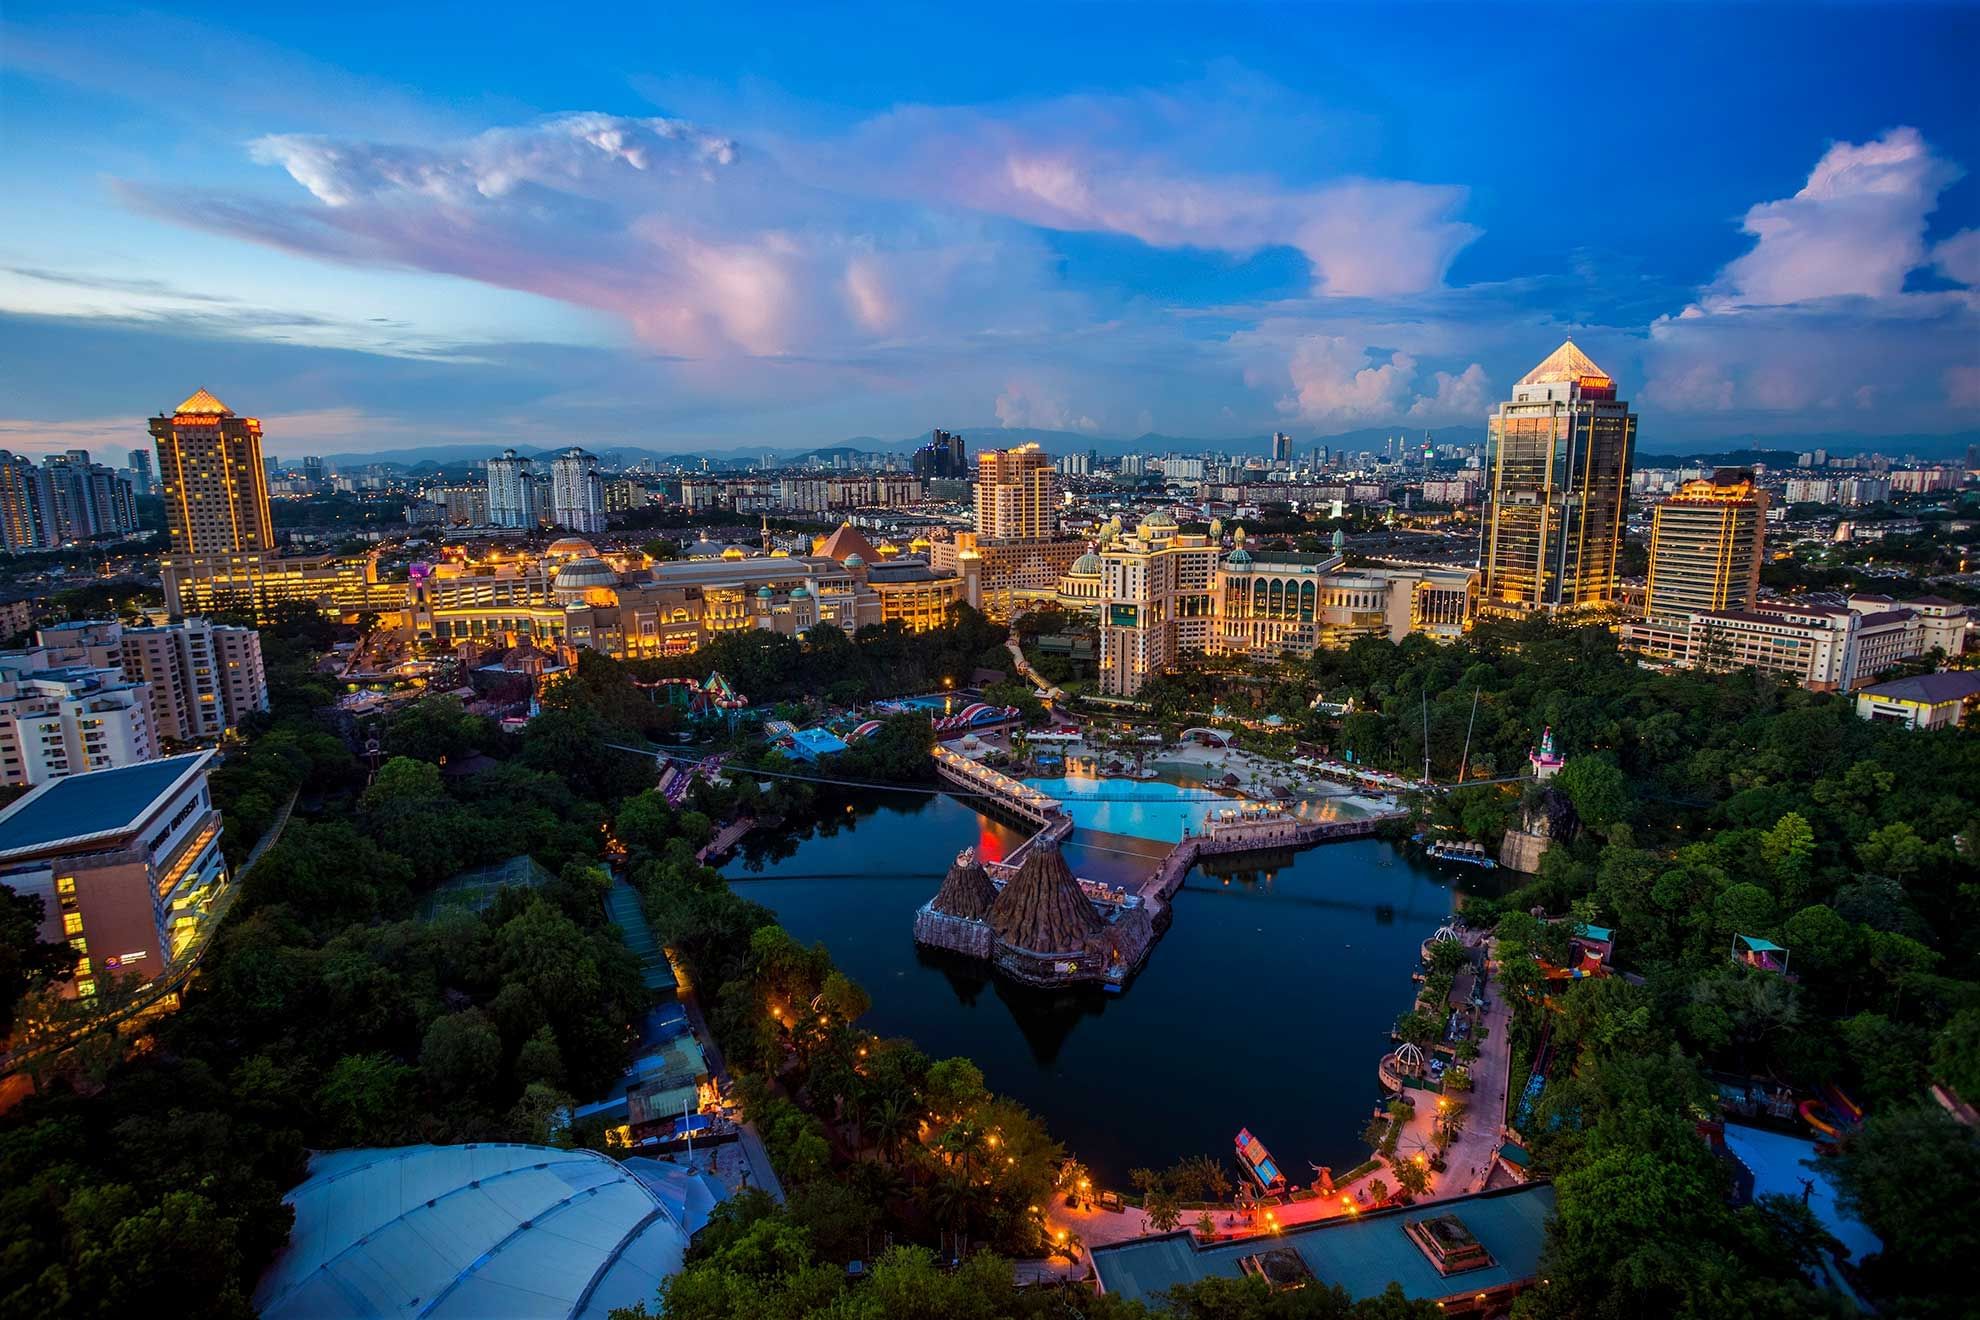 Aerial view of Sunway City near Sunway Lagoon in the evening